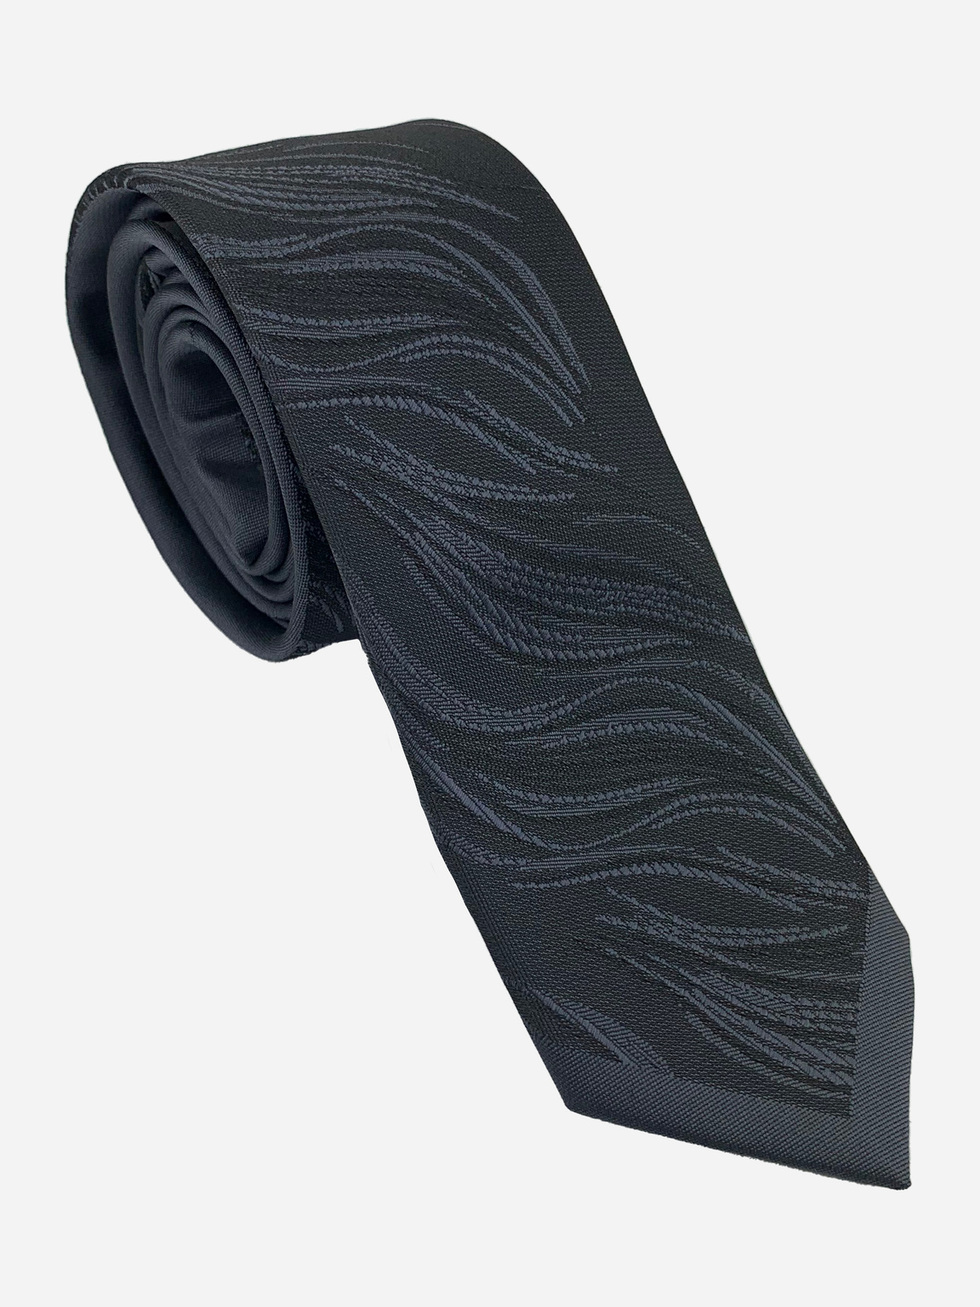 GRAY NECKTIE WITH MAUVE WOVEN PATTERN